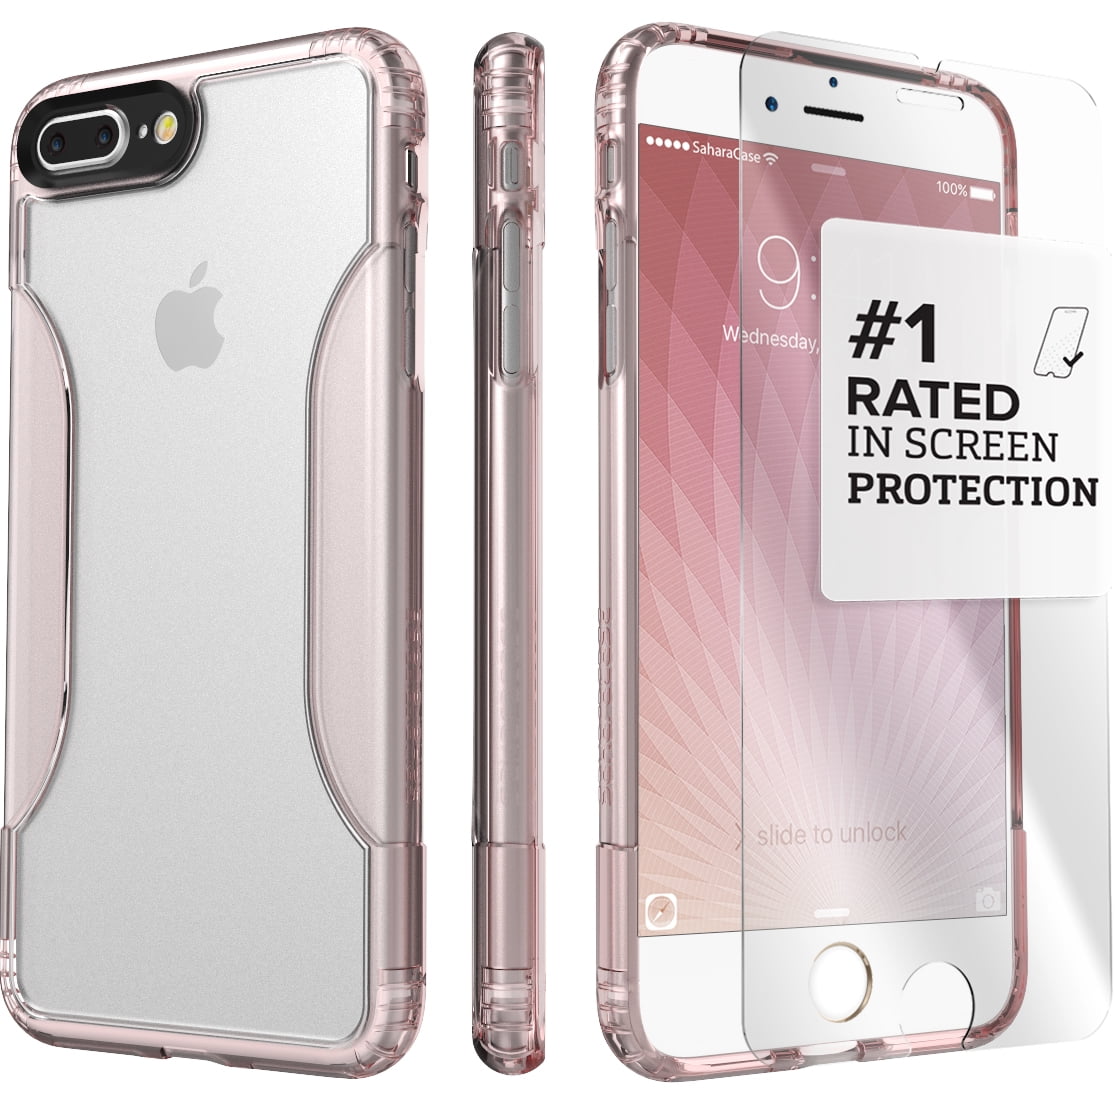 Slim Fit Aqua Teal Shockproof Bumper SaharaCase Protective Kit Bundle with Rugged Protection Anti-Slip Grip iPhone 8 Case and 7 Case ZeroDamage Tempered Glass Screen Protector